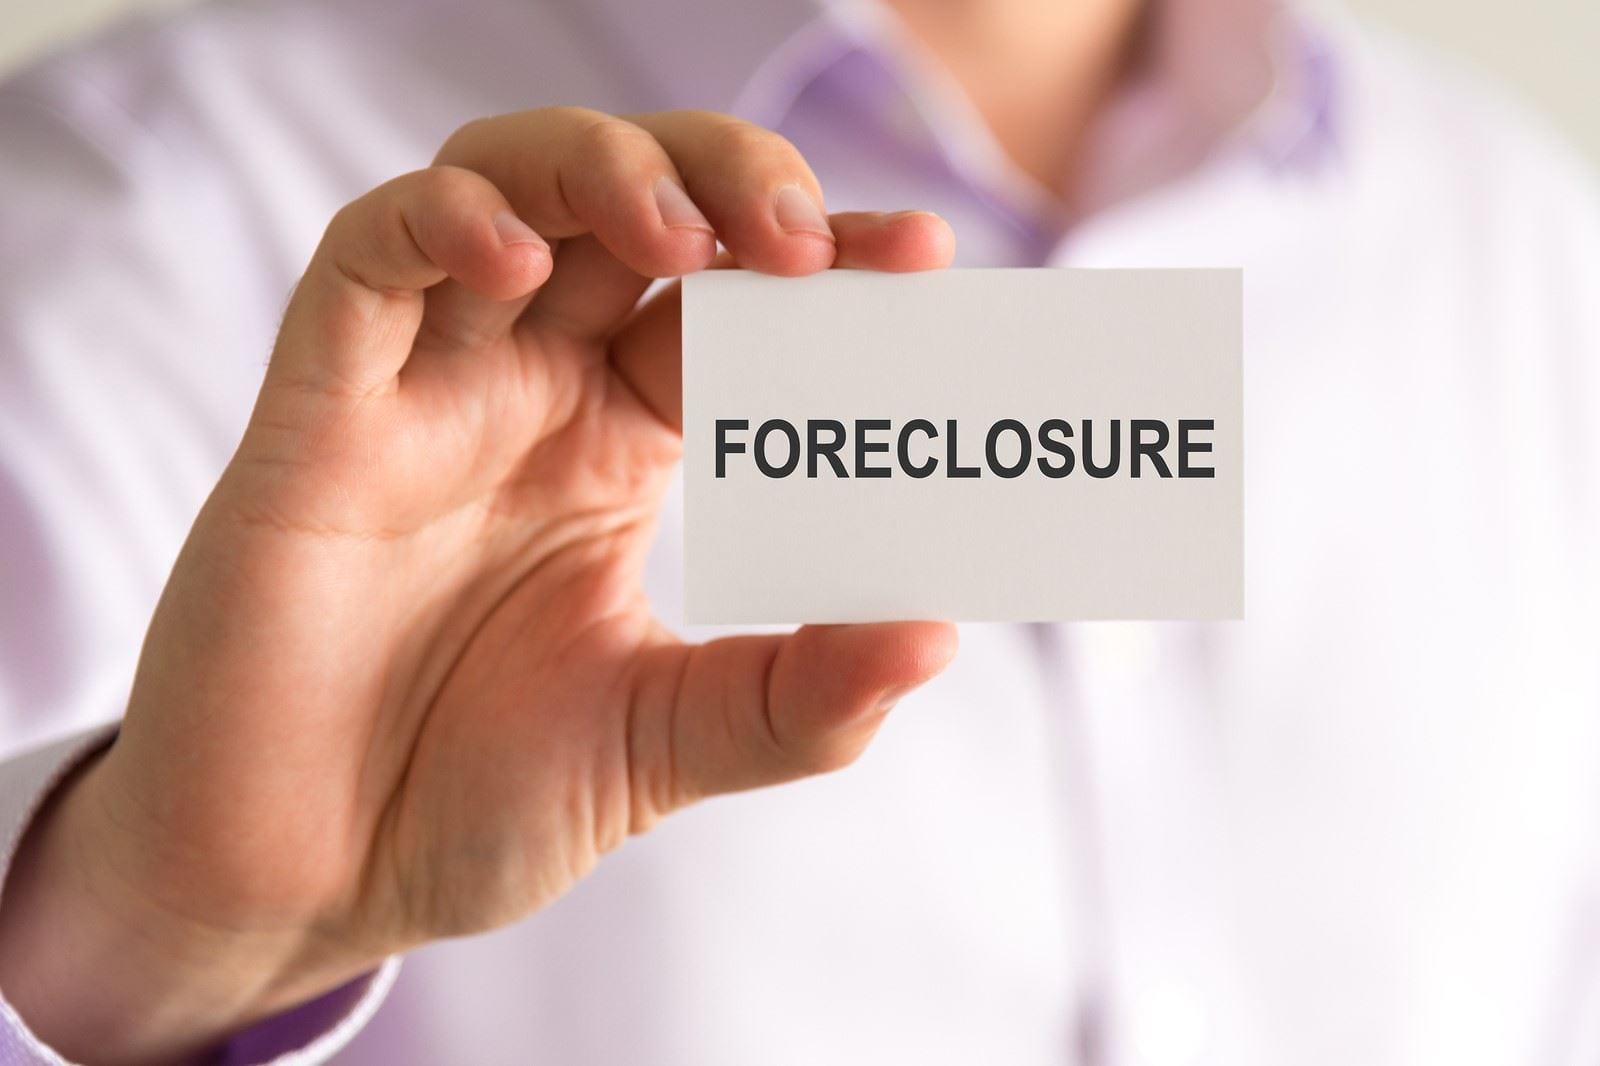 do you need a realtor to buy a foreclosure